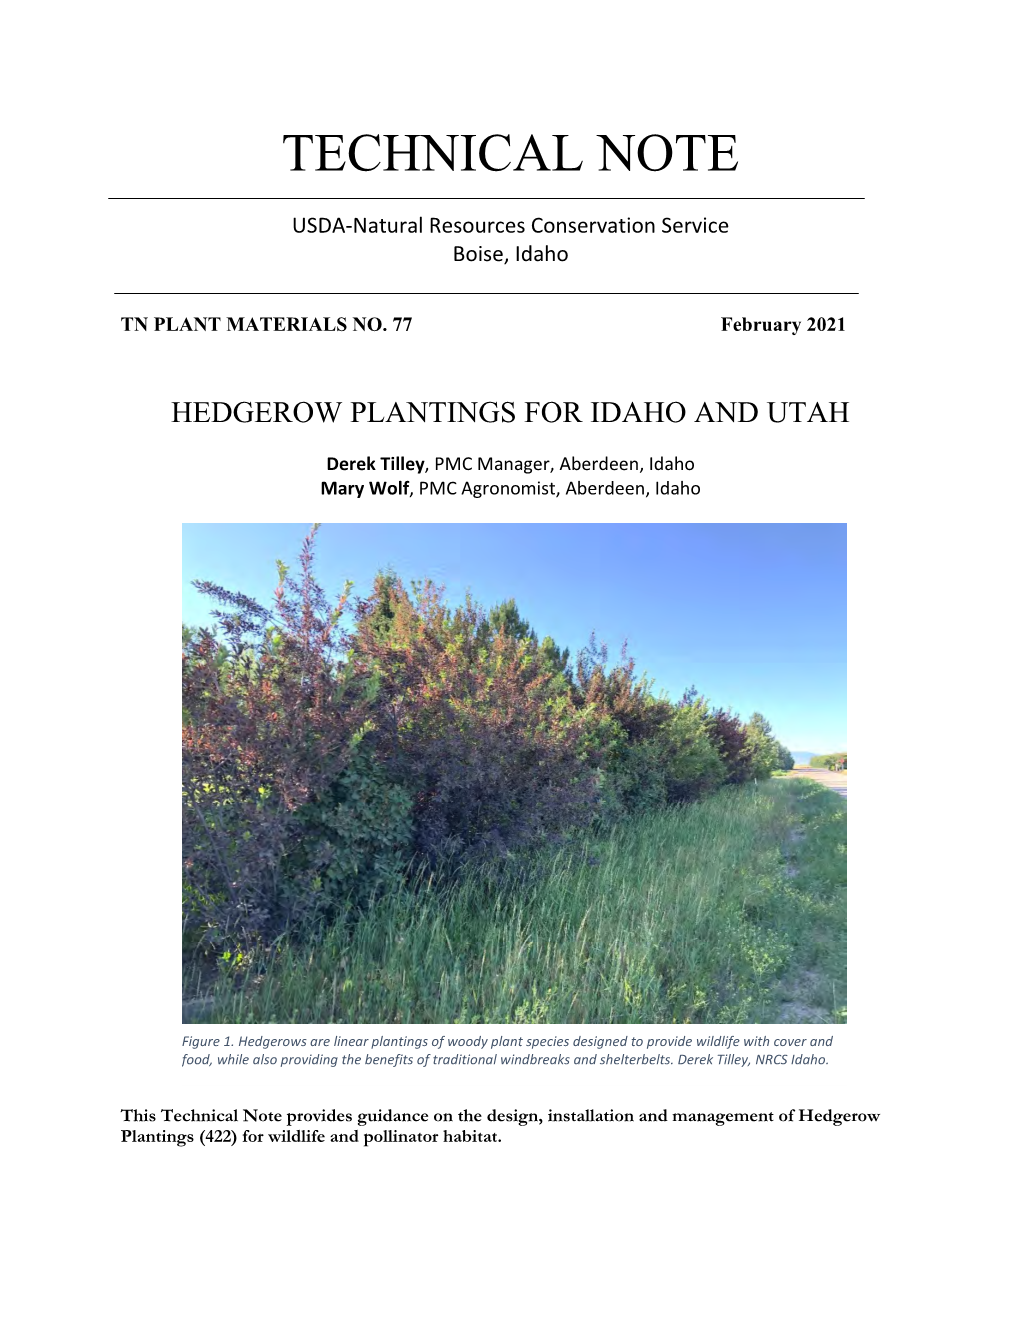 Technical Note 77: Hedgerow Plantings for Idaho and Utah